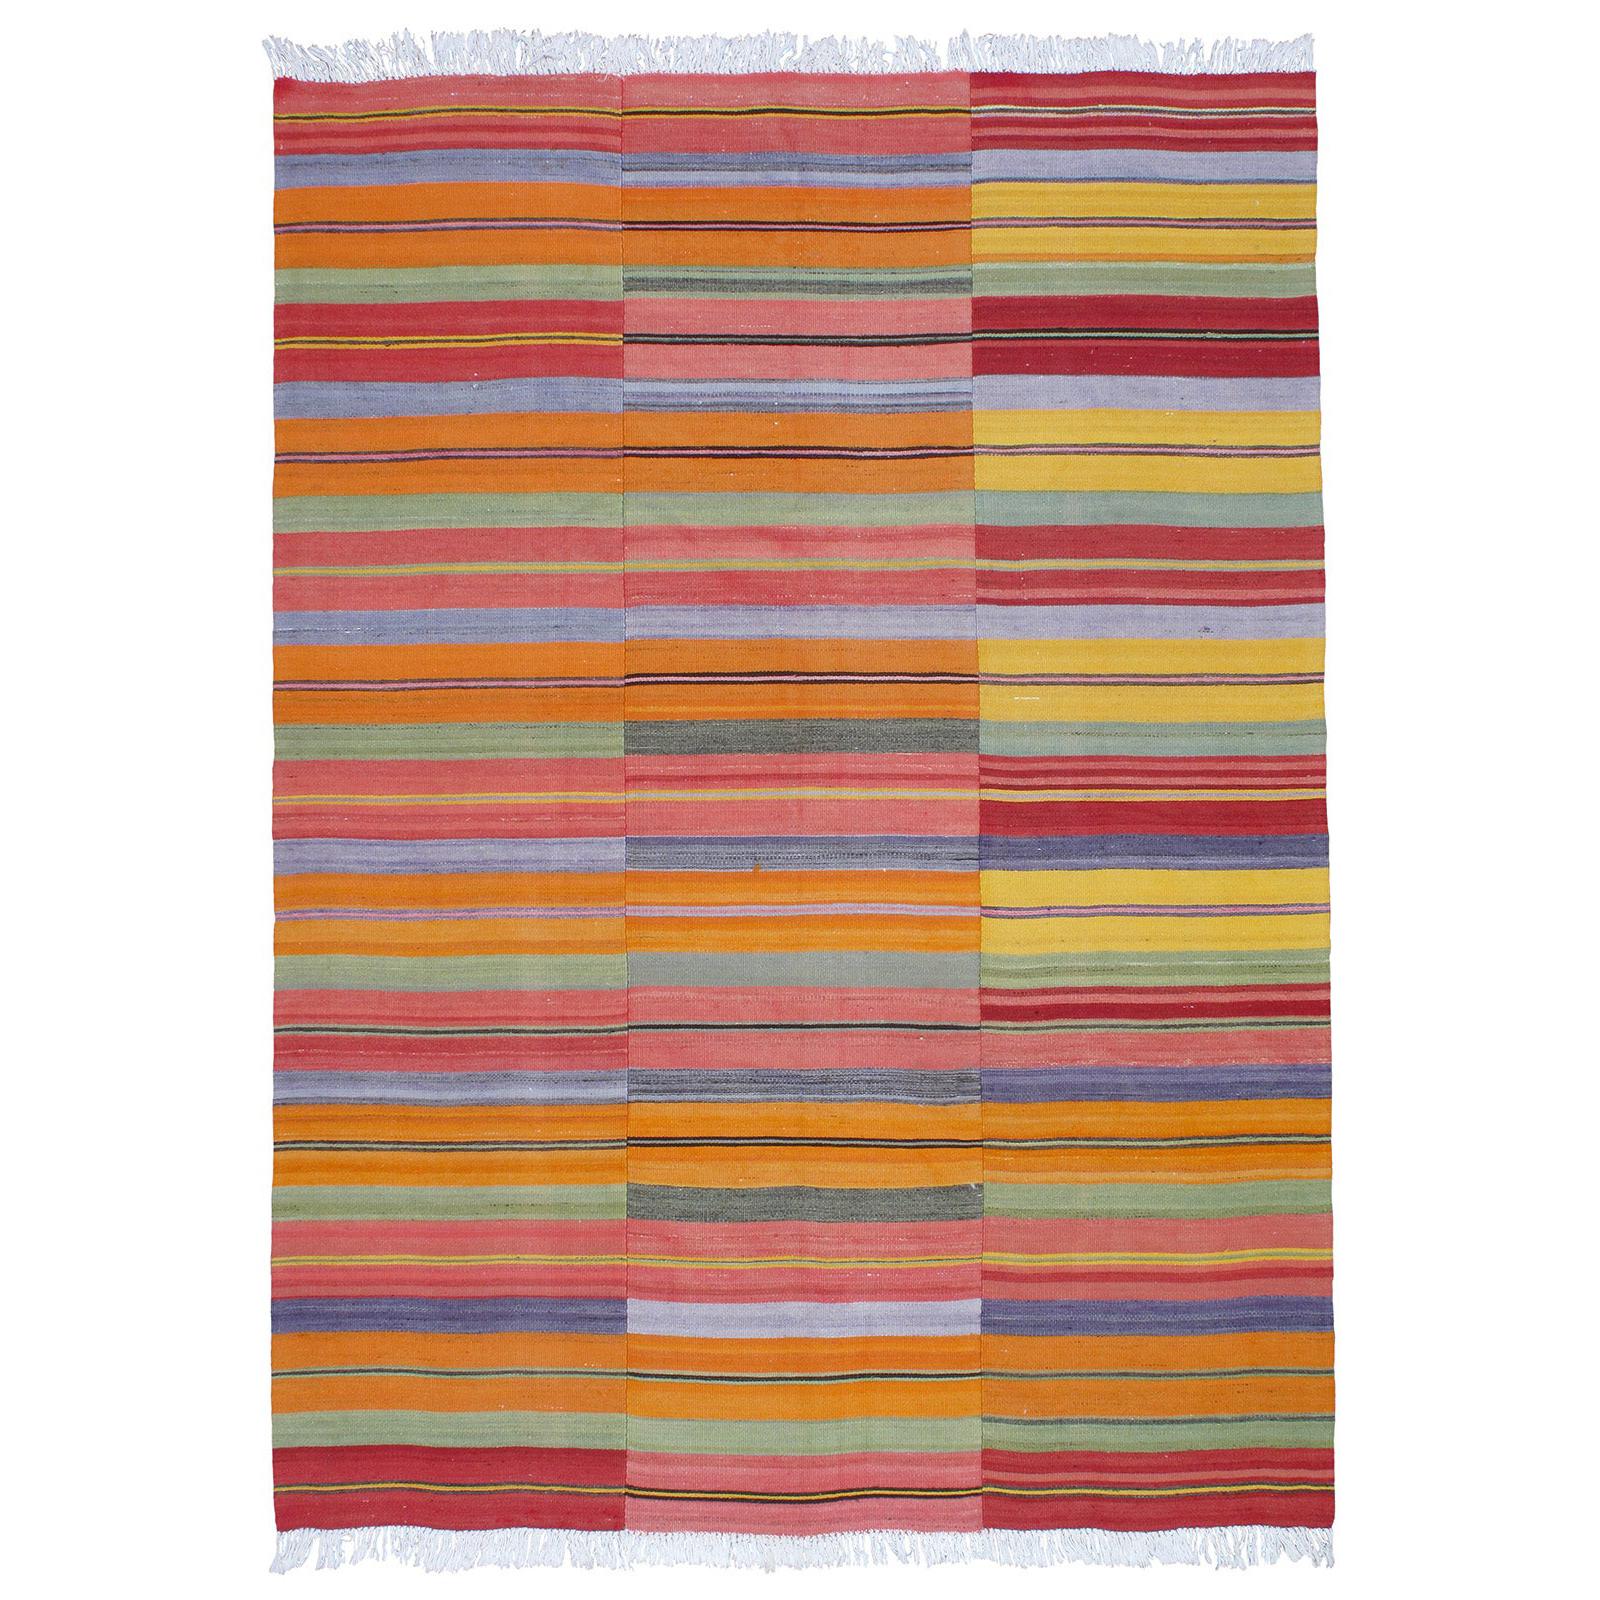 Kilim with Multi-Colored Bands